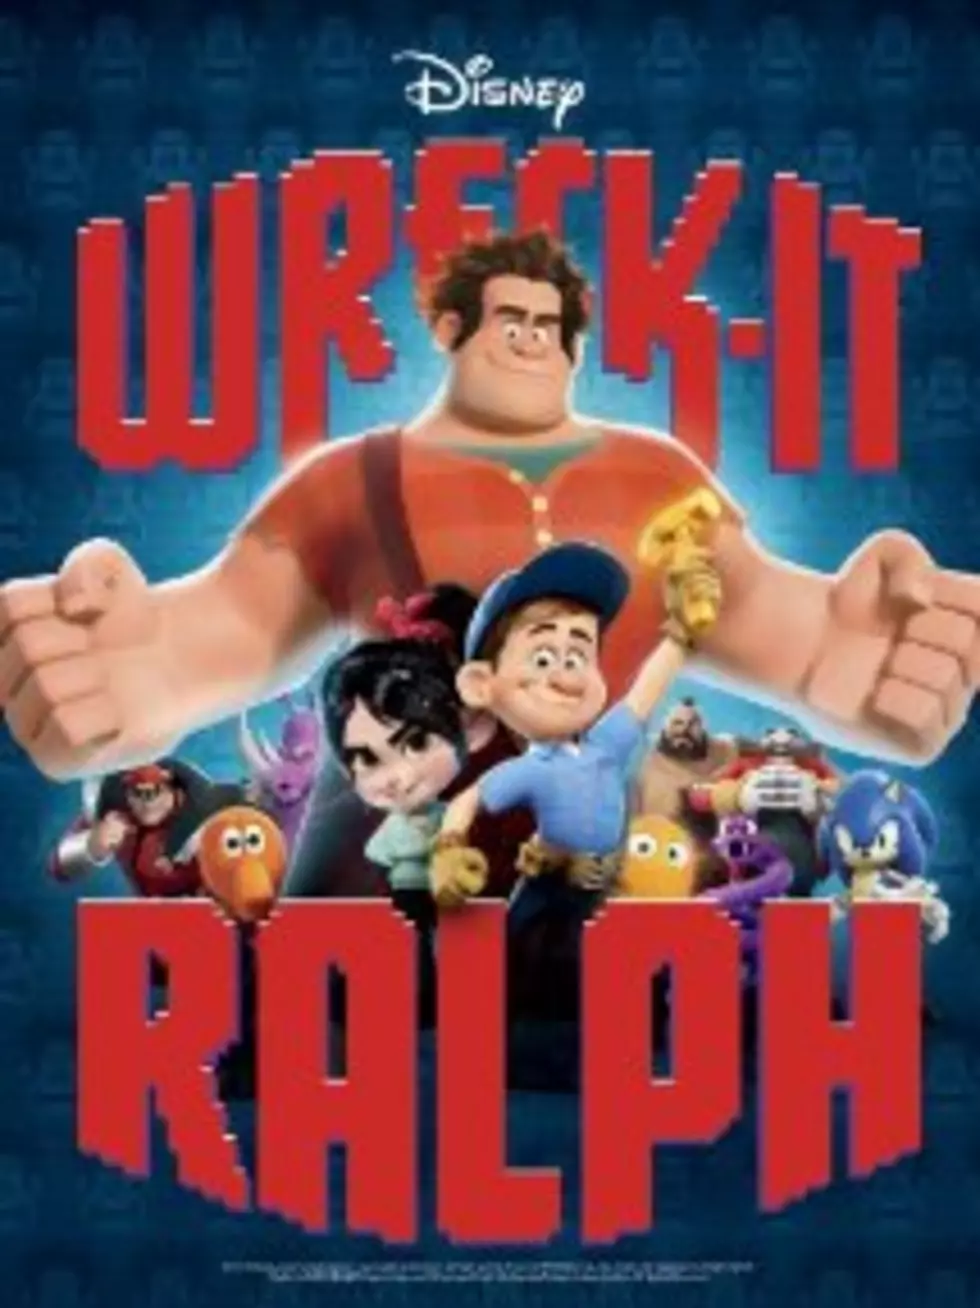 This Friday Night’s FREE Downtown Movie Is “Wreck It Ralph”